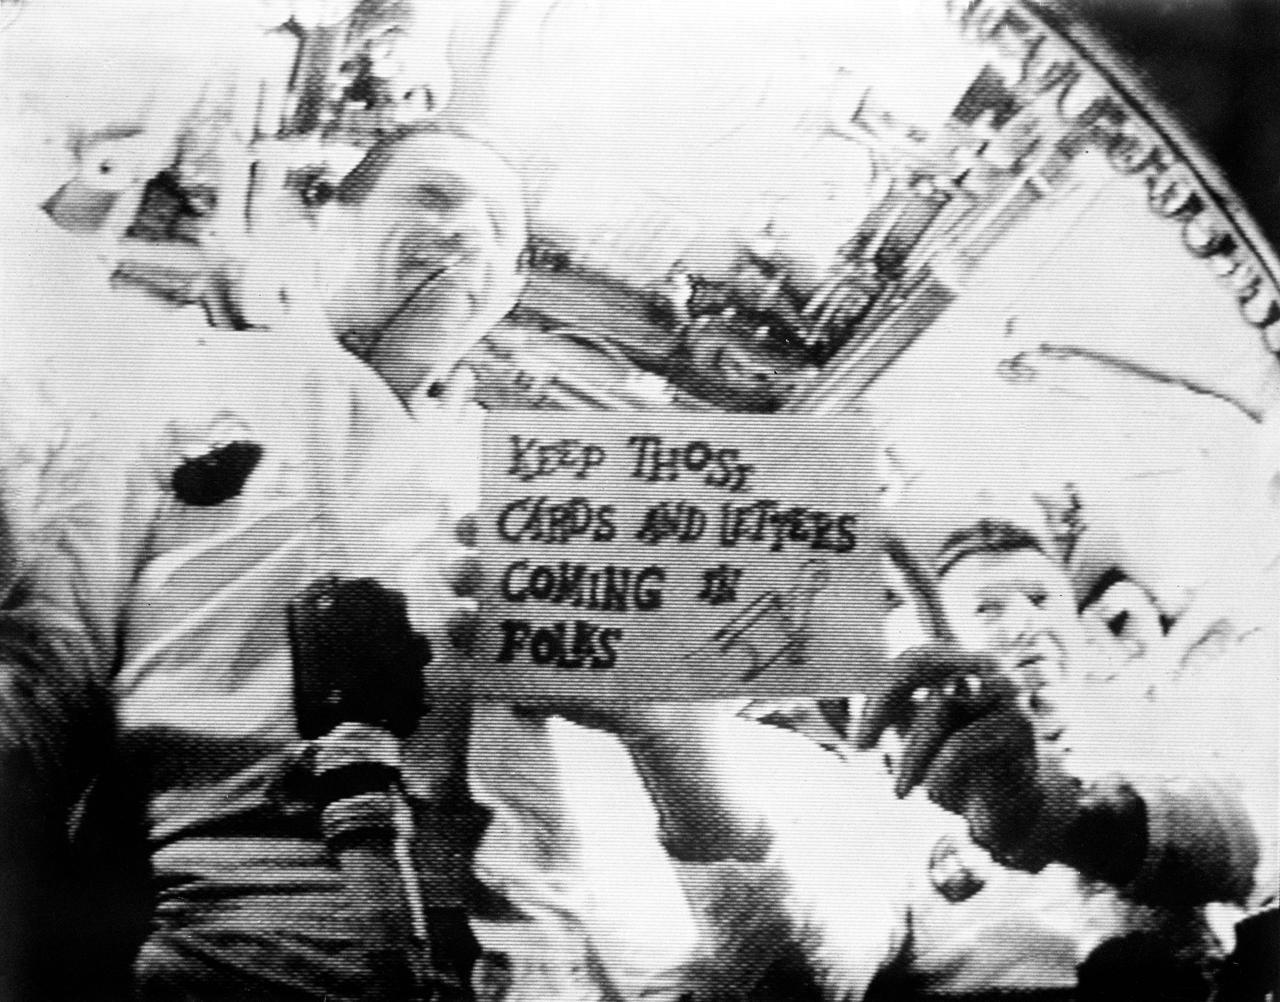 Apollo 7 astronauts seen in the first live television transmission from space. Sign reads “Keep those cards and letters coming in folks.”